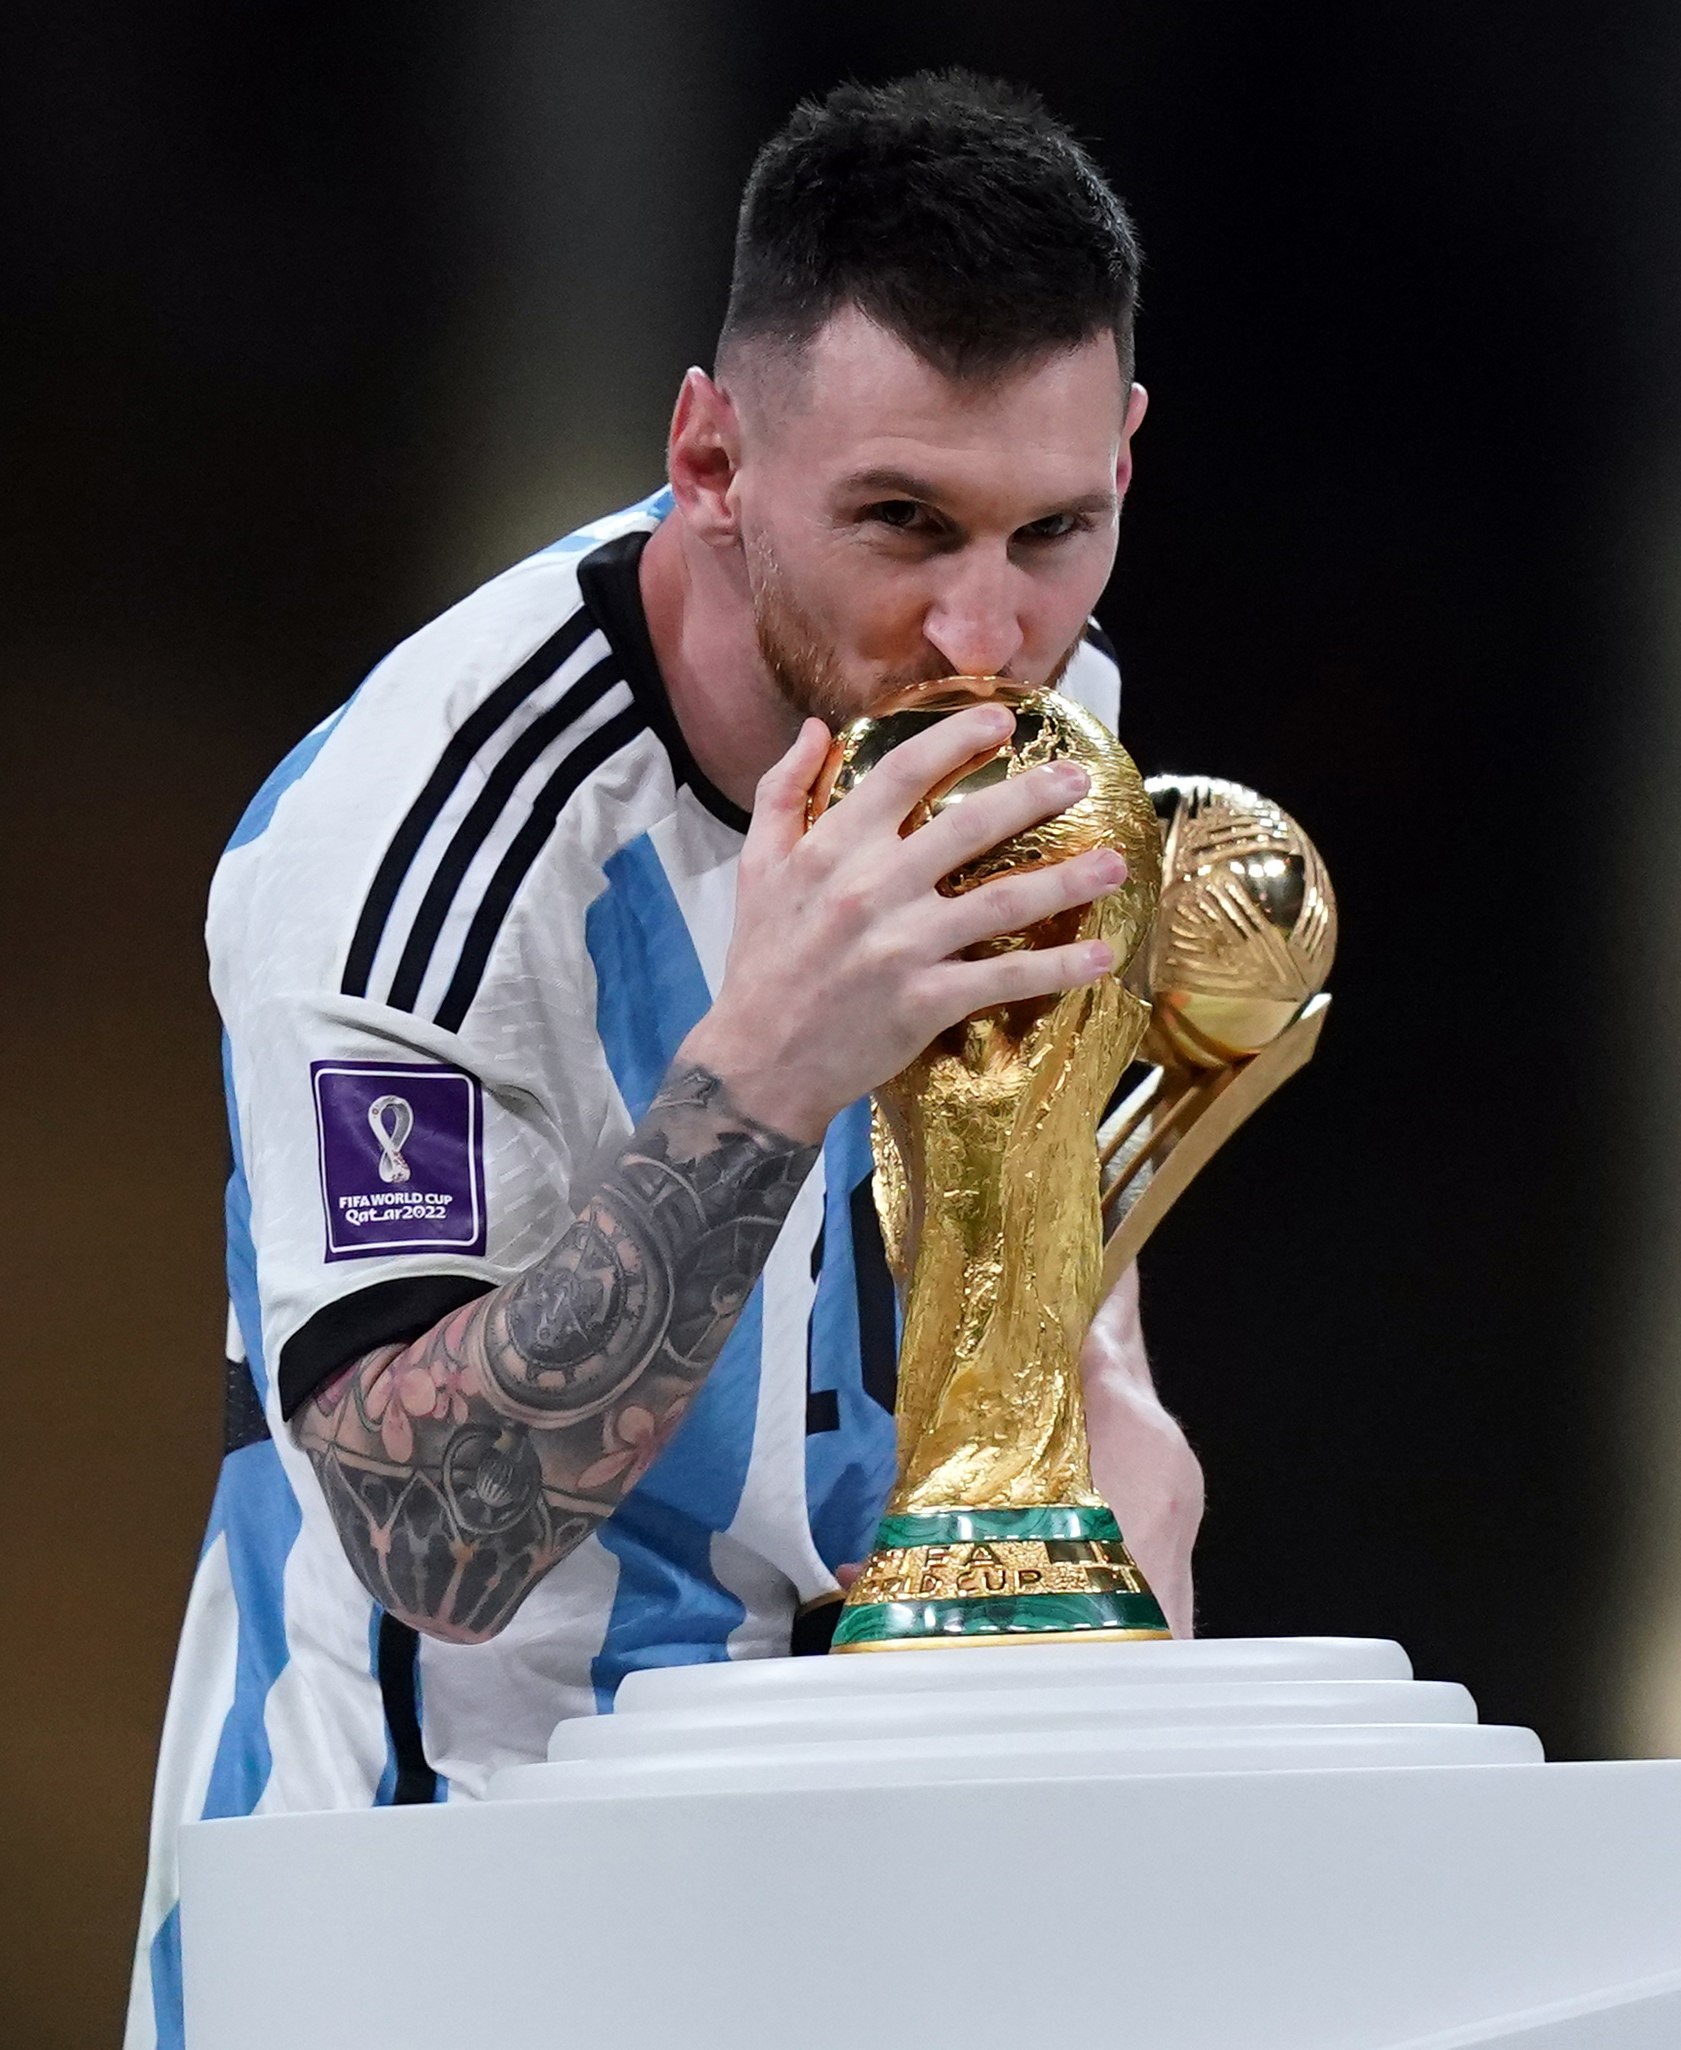 Argentina's Lionel Messi kisses the FIFA World Cup trophy after being presented with the Golden Ball award following victory in the FIFA World Cup final at Lusail Stadium, Qatar. <em> (Mike Egerton/PA)</em>”/><cite class=cite></cite></div><figcaption aria-hidden=true>Argentina’s Lionel Messi kisses the FIFA World Cup trophy after being presented with the Golden Ball award following victory in the FIFA World Cup final at Lusail Stadium, Qatar. <em> (Mike Egerton/PA)</em> <cite class=hidden></cite></figcaption></figure><p>Galtier was keen to pay tribute to his on-field contributions.</p><p>He said: “He has always been available, always present in the training sessions.</p><p>“Despite the remarks or criticisms that I don’t think were justified at all, he has always been at the service of the team, both as a provider of assists and as a goalscorer.</p><p>“He is 35 years old, there was a World Cup in the middle of the season. His stats outside of the World Cup, correct me if I am wrong, but I think he is on 21 goals and 22 assists, which means he has (contributed) 43 times this season.”</p><div class=